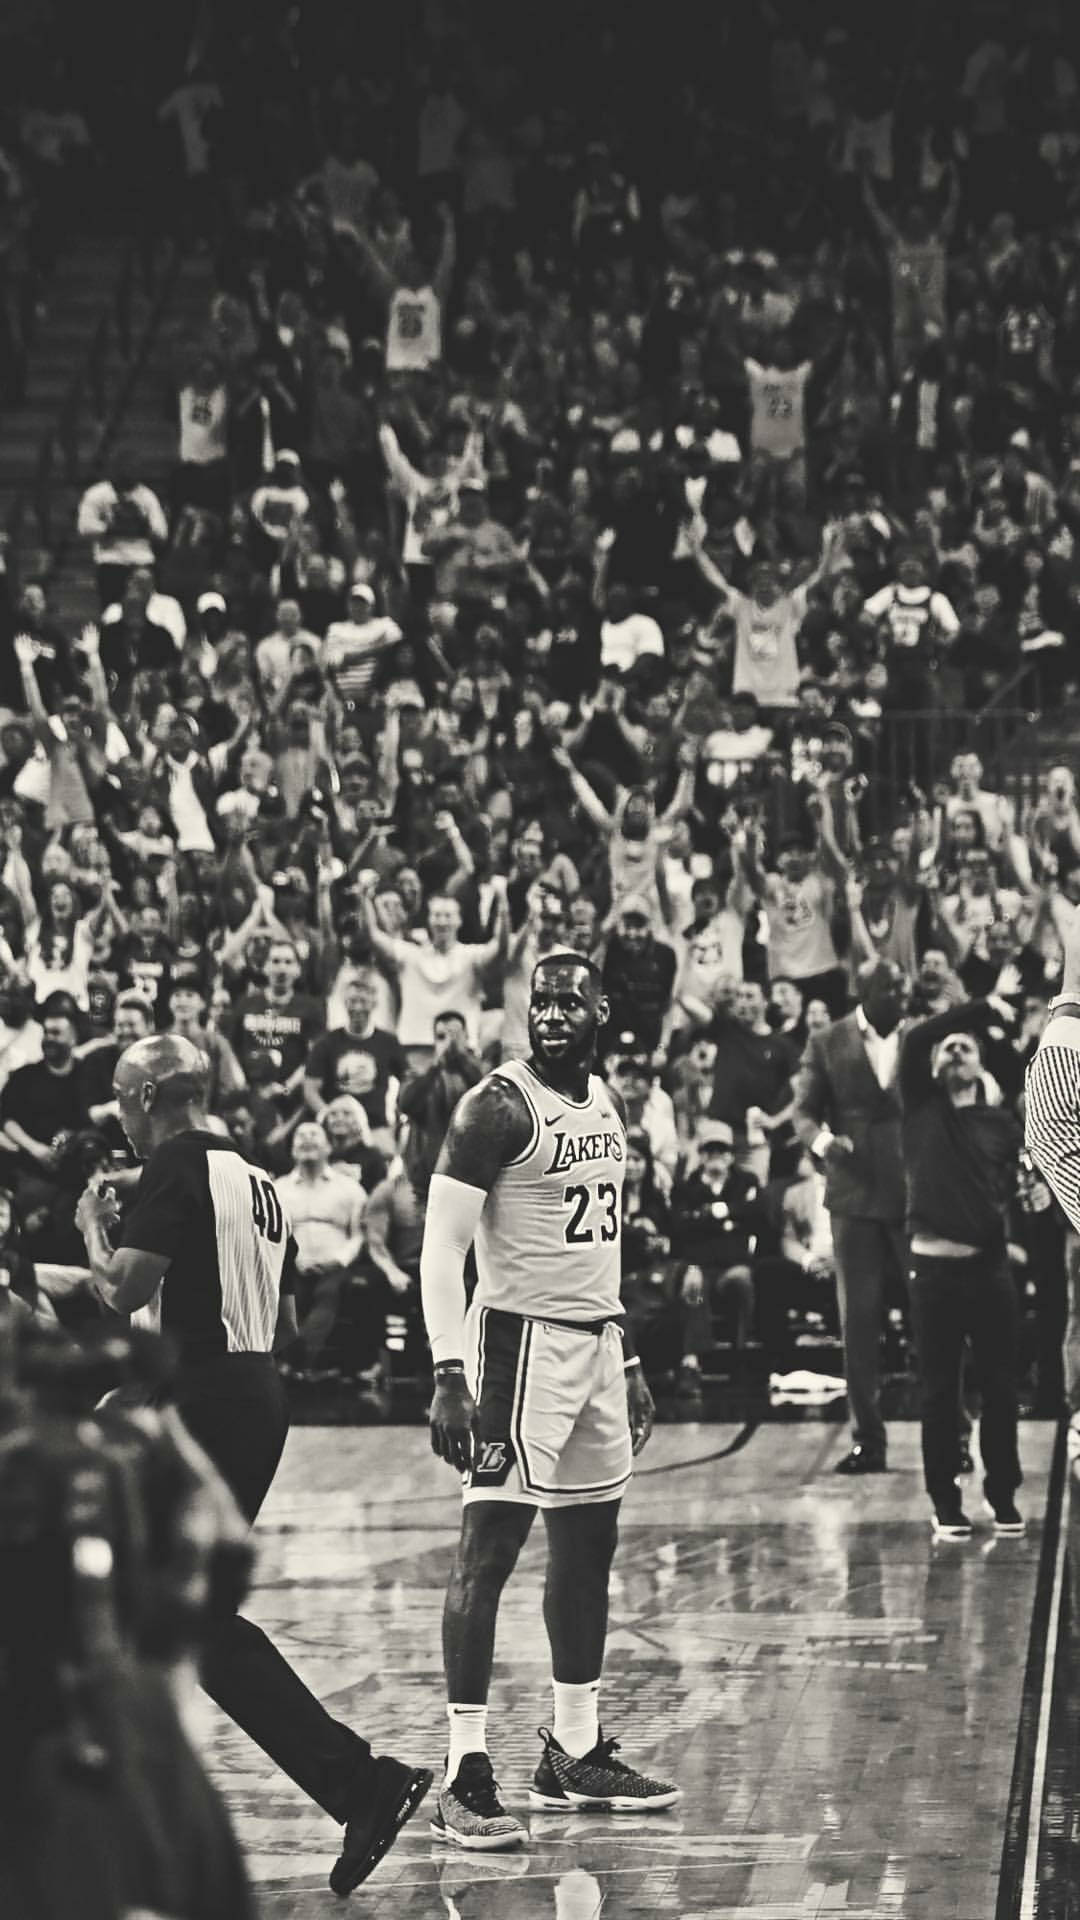 A black and white photo of a basketball player on the court with a crowd of fans behind him. - Lebron James